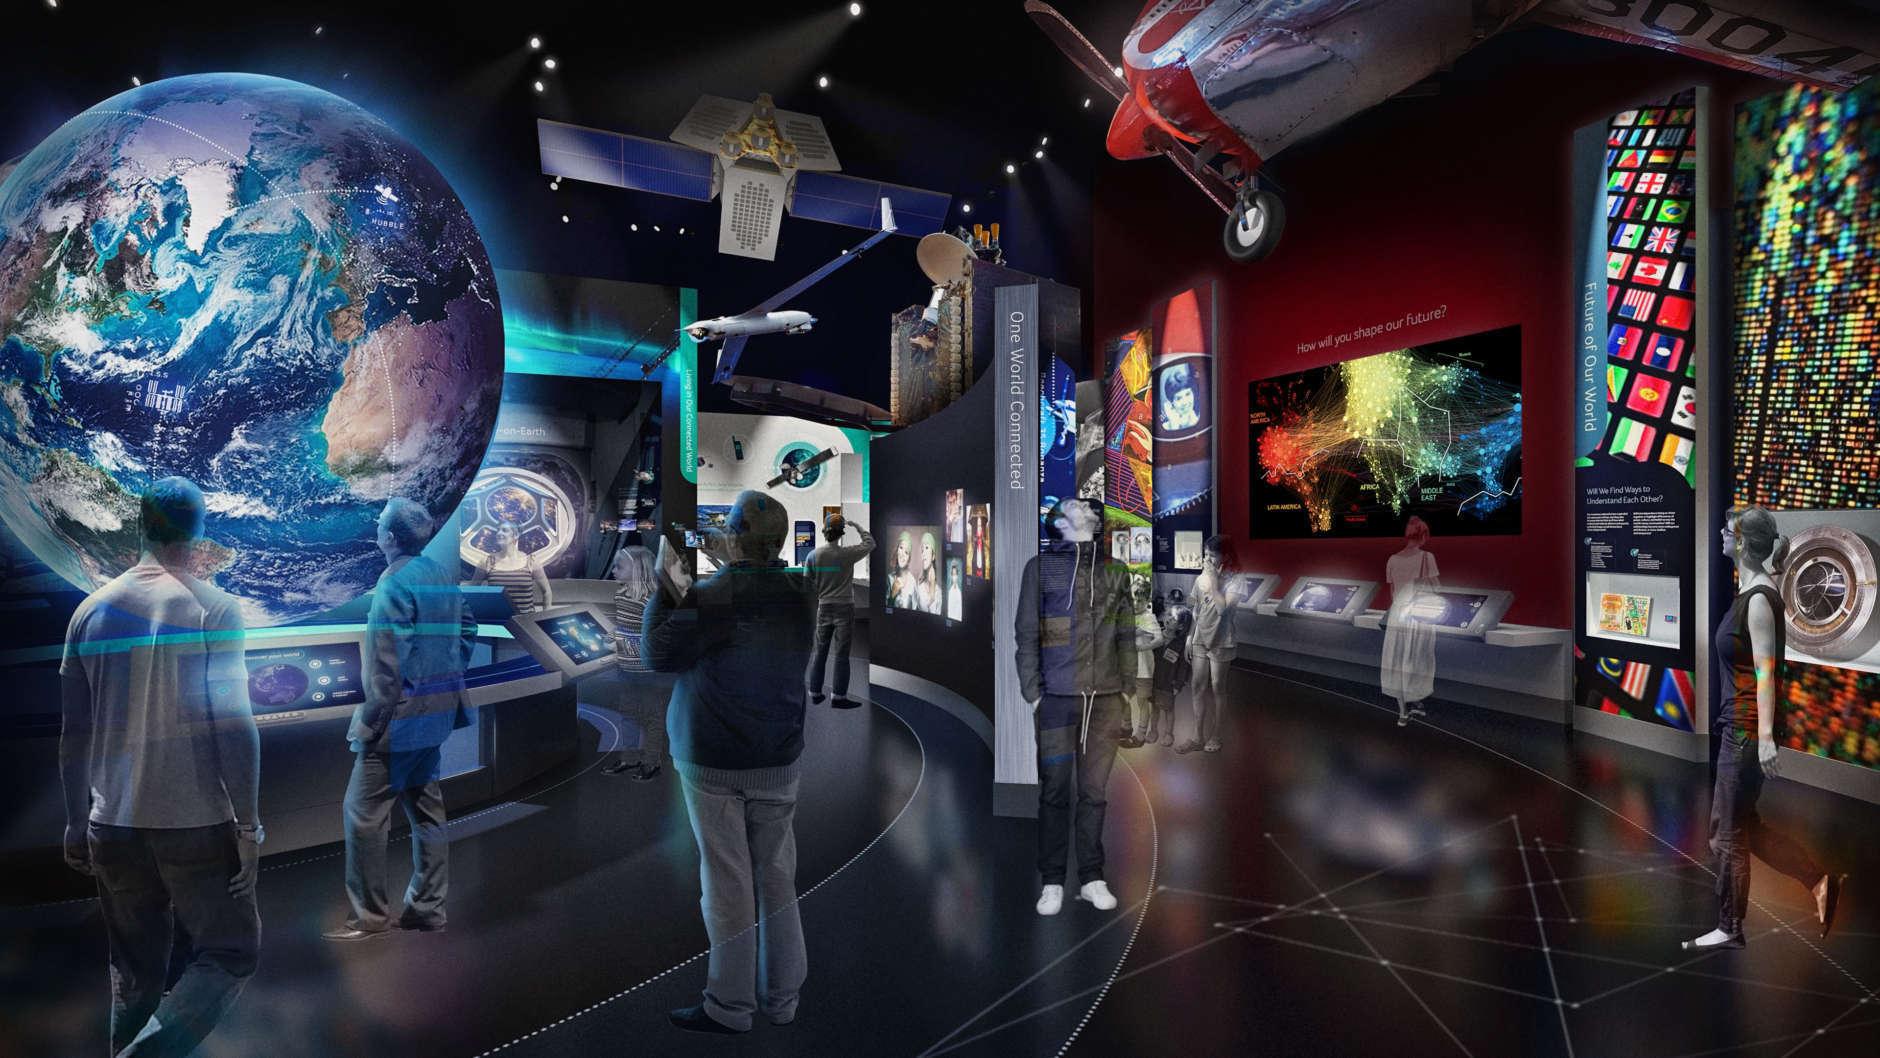 The "One World Connected" exhibit. (Copyright: Smithsonian Institution)